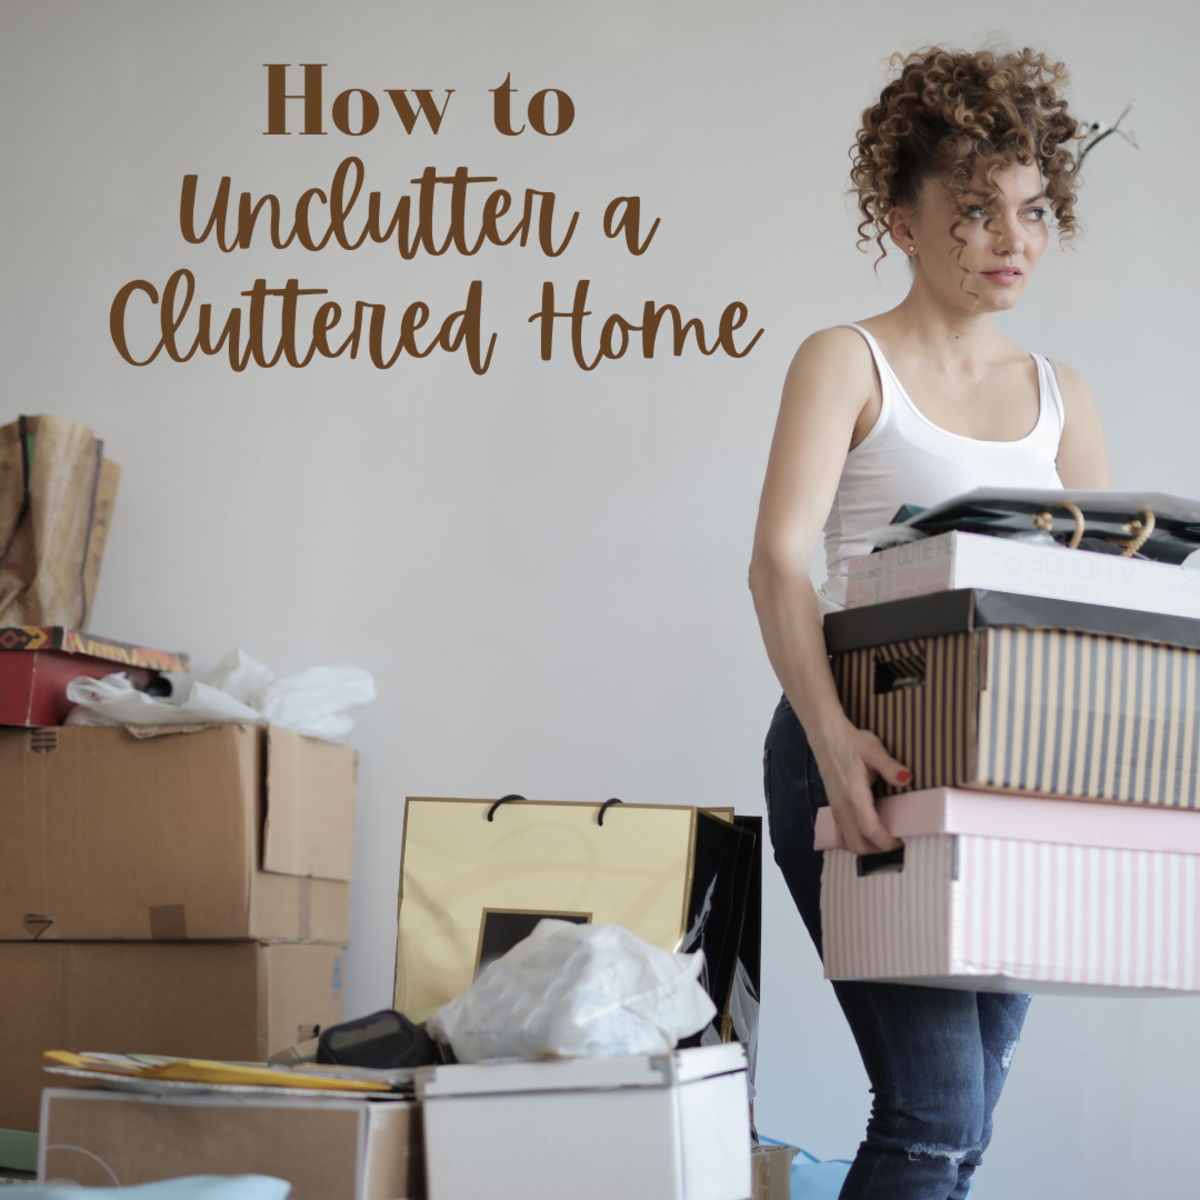 Keeping your house free of clutter can be a challenge—here are some tips to help you unclutter your clutter!